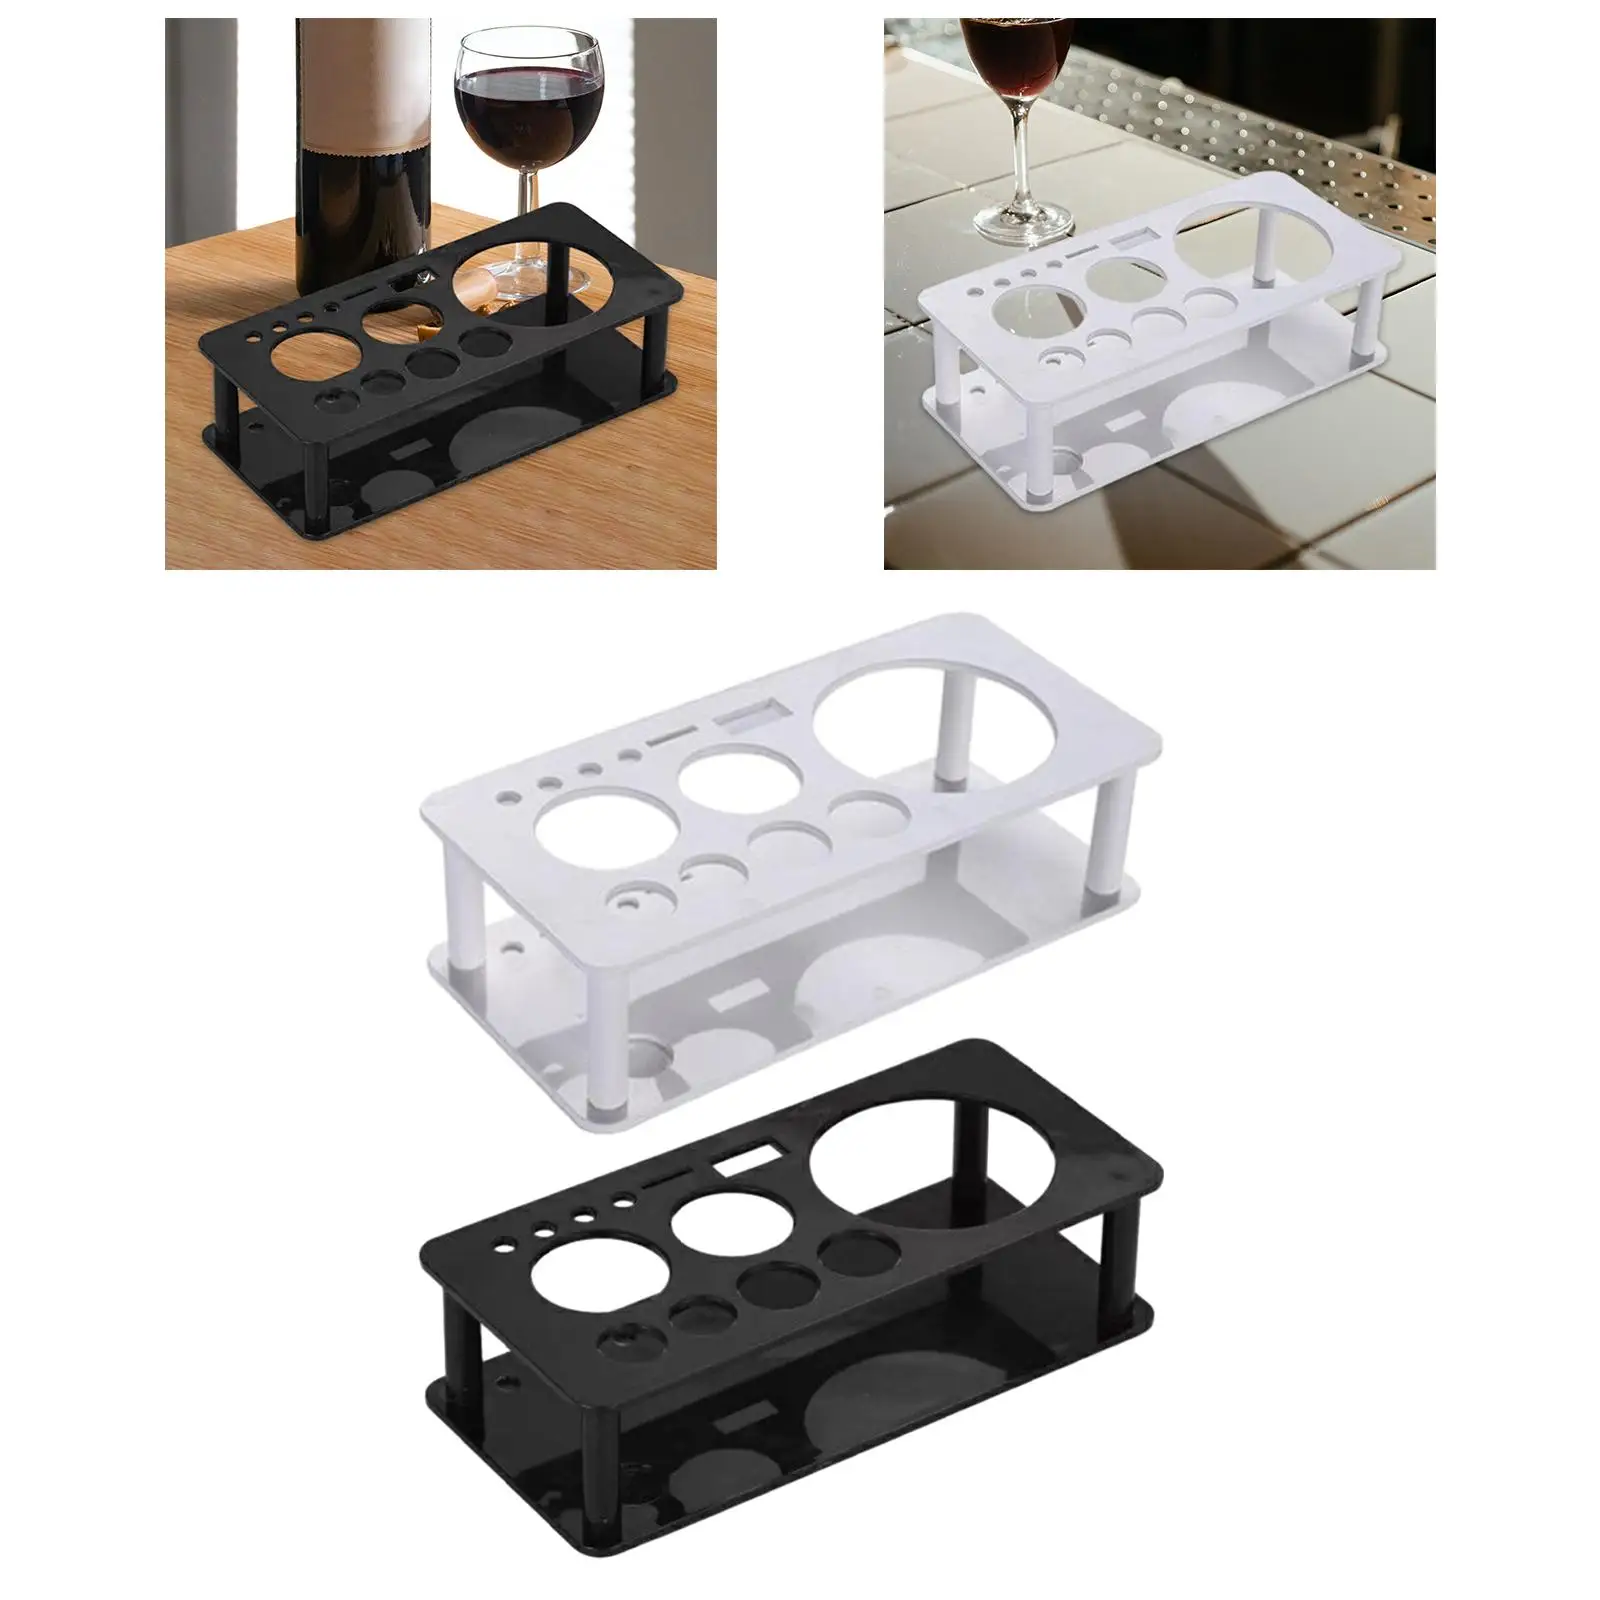 Bartender Tool Holder Barware Drinkware Set Stand Practical Professional Cocktail Shaker Stand for Party Bar Home Beginners